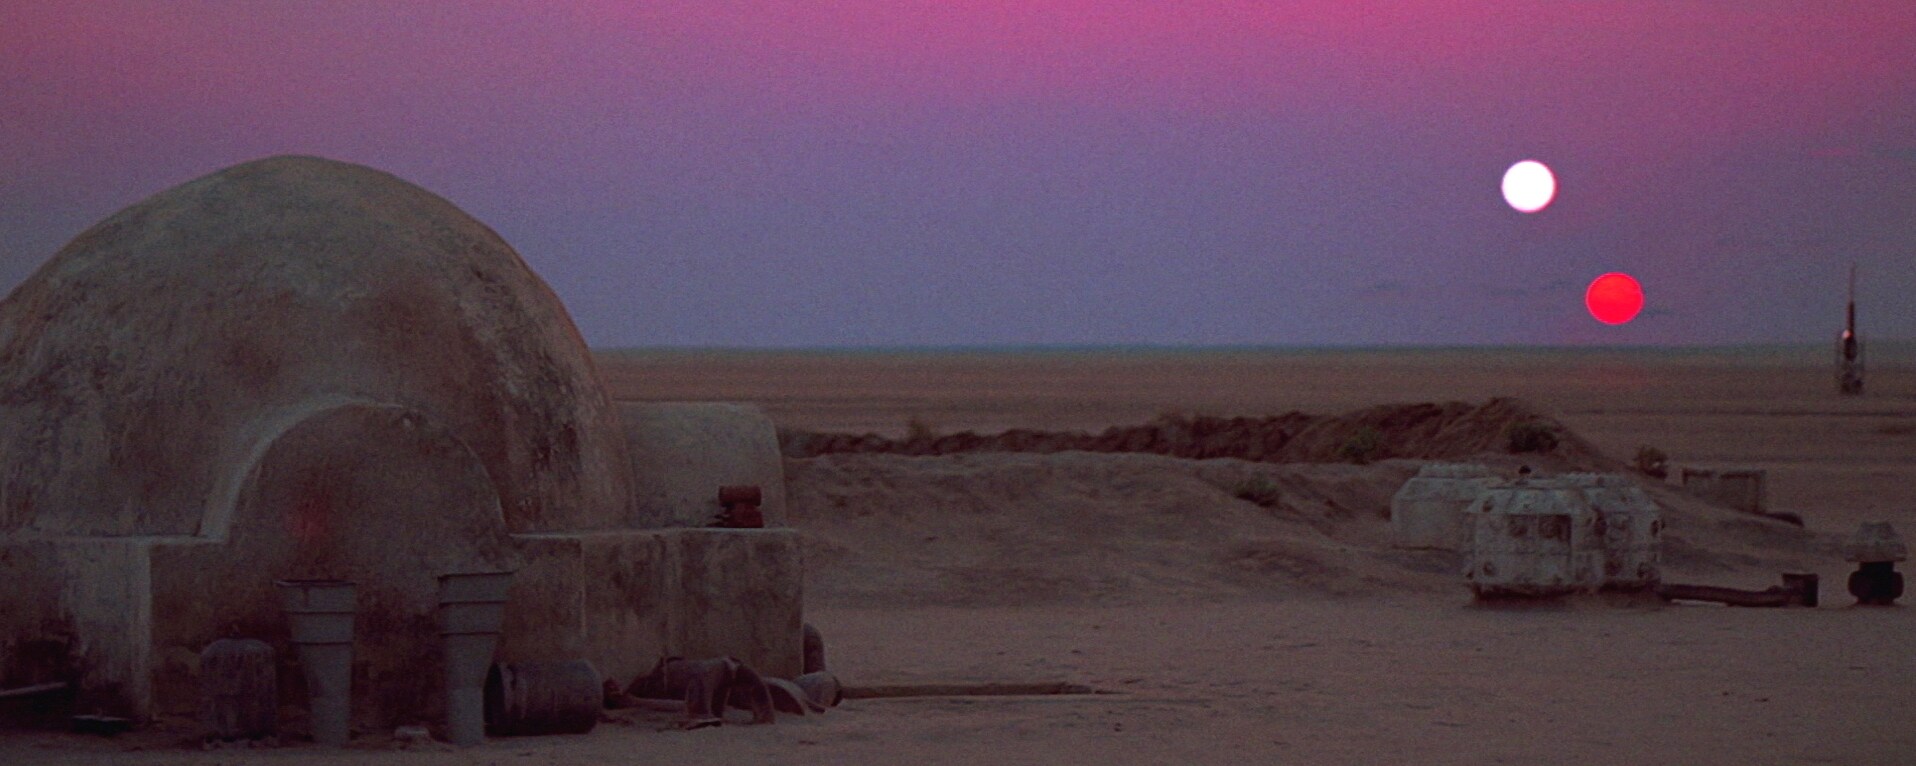 Tatooine sunset from A New Hope